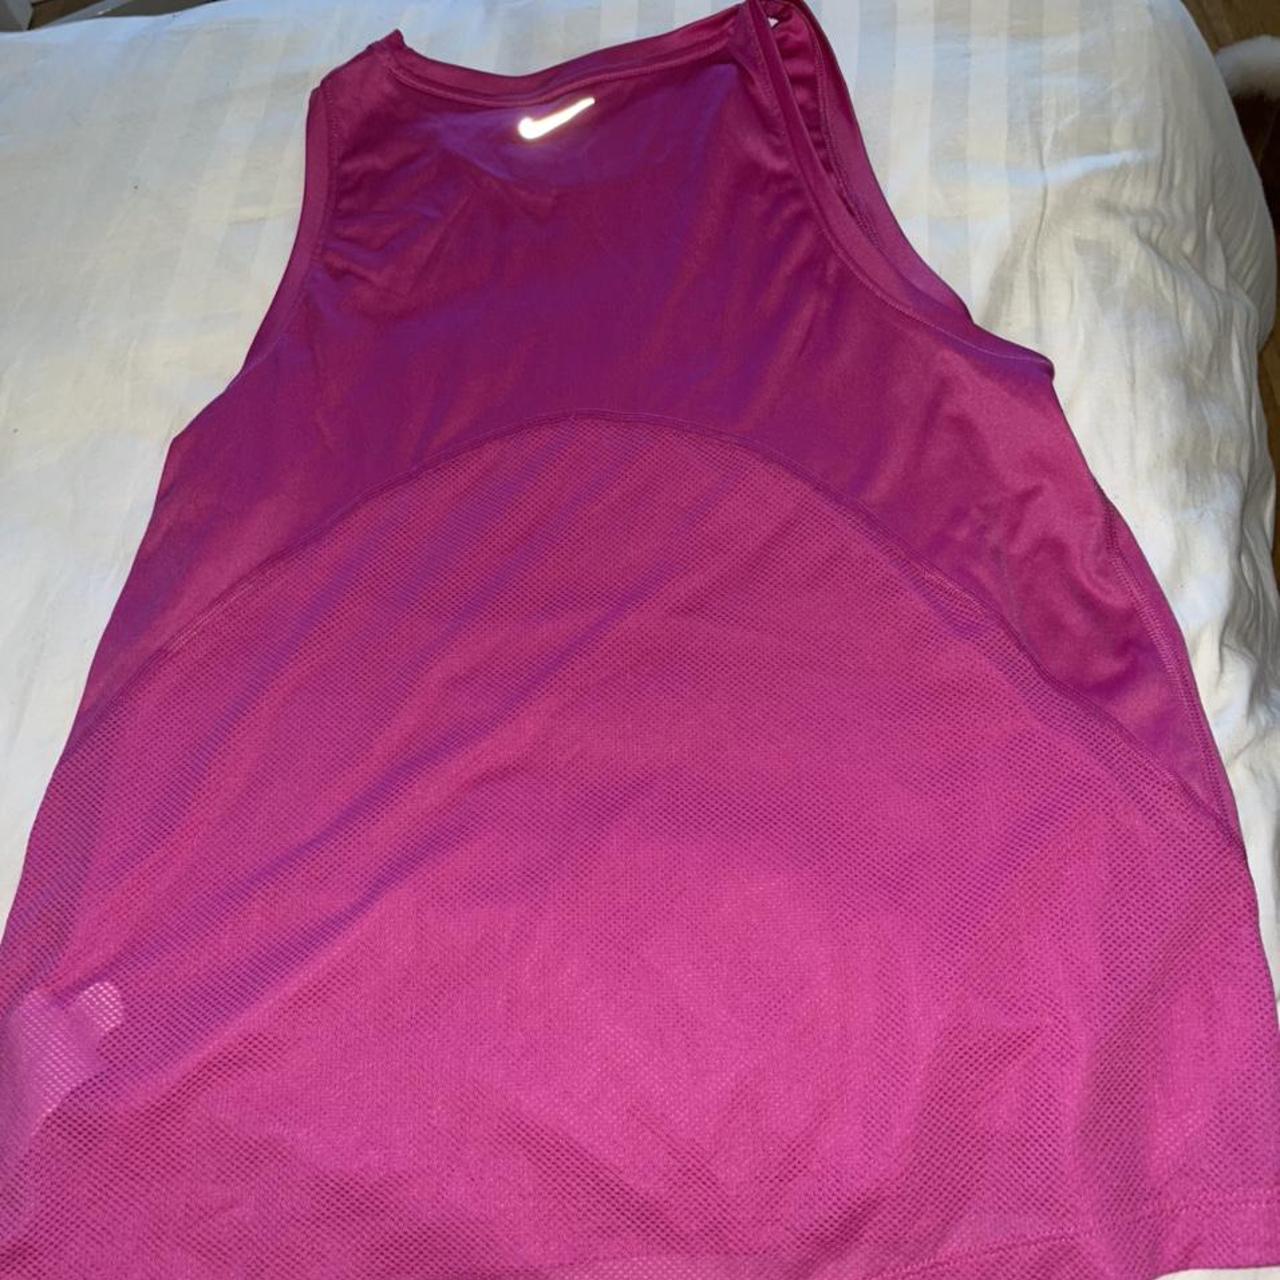 Product Image 3 - Nike tank top in hot